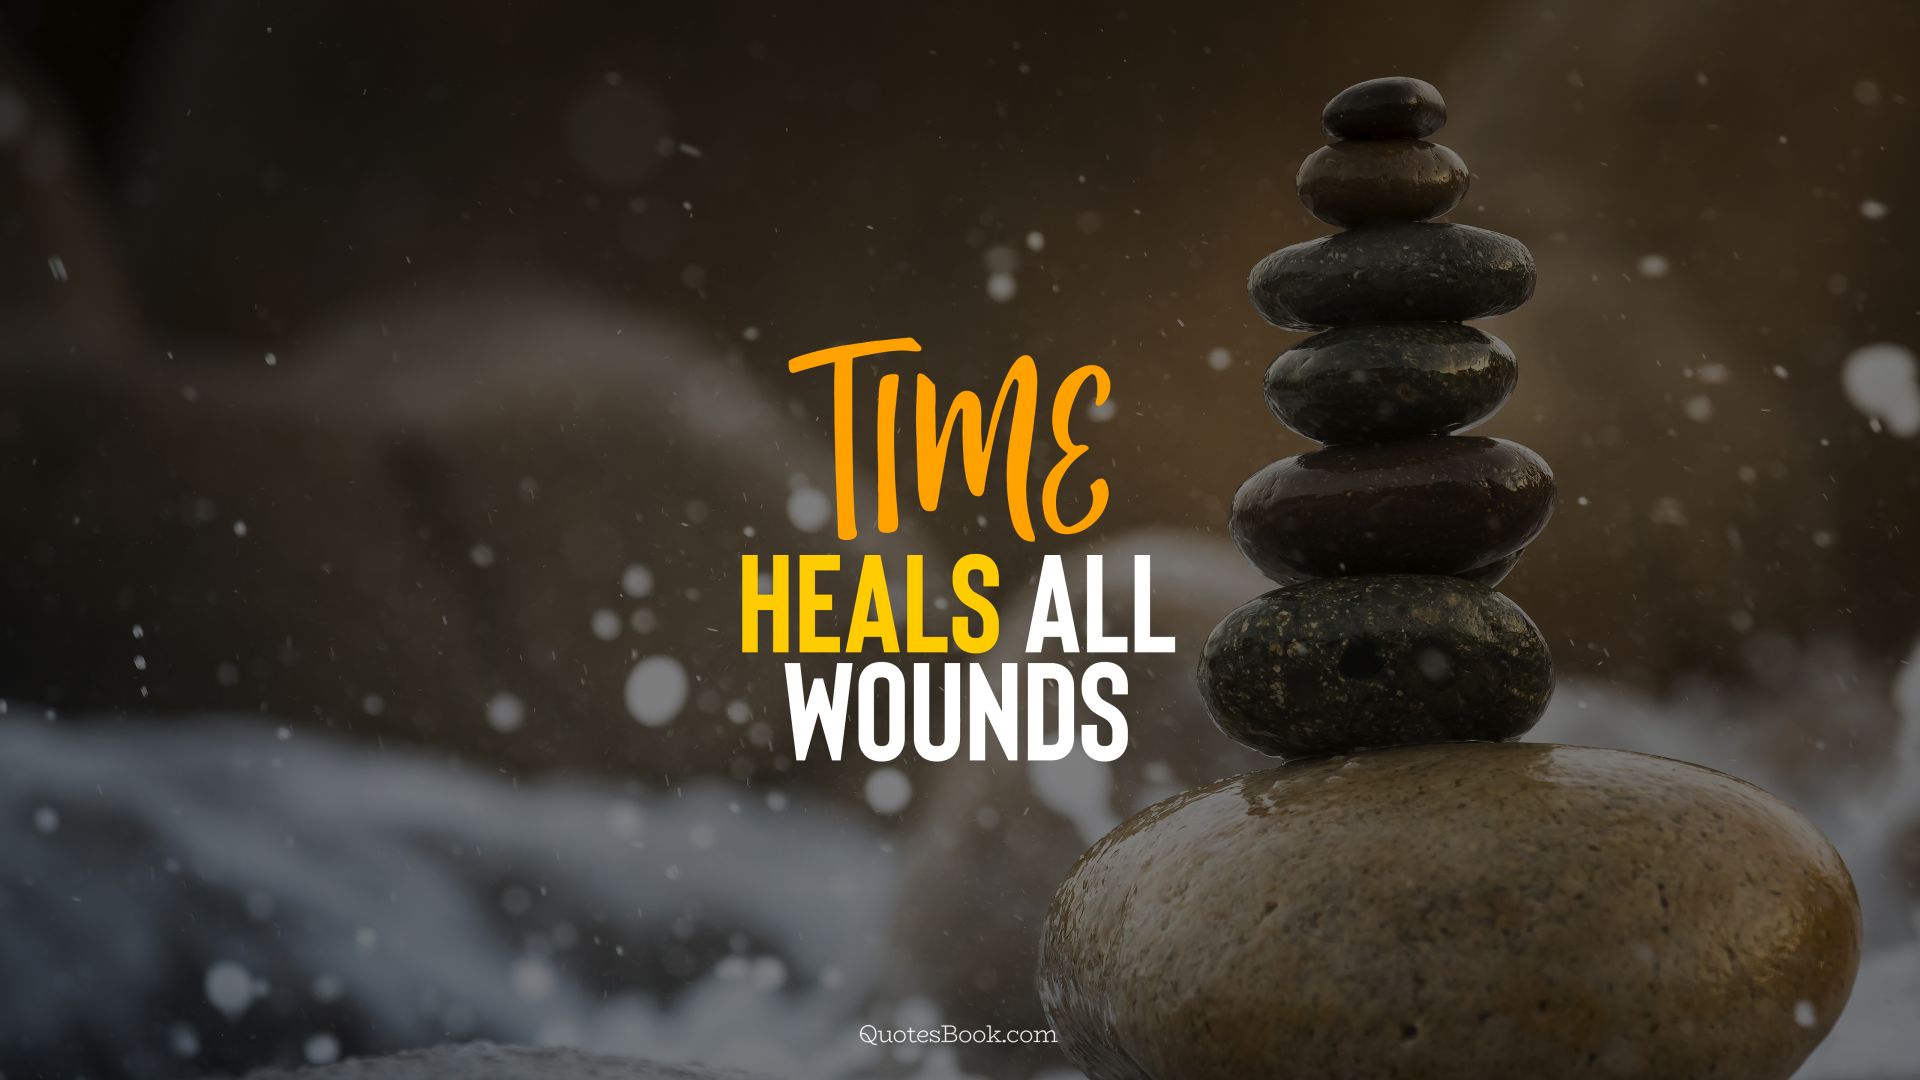 Time heals all wounds - QuotesBook